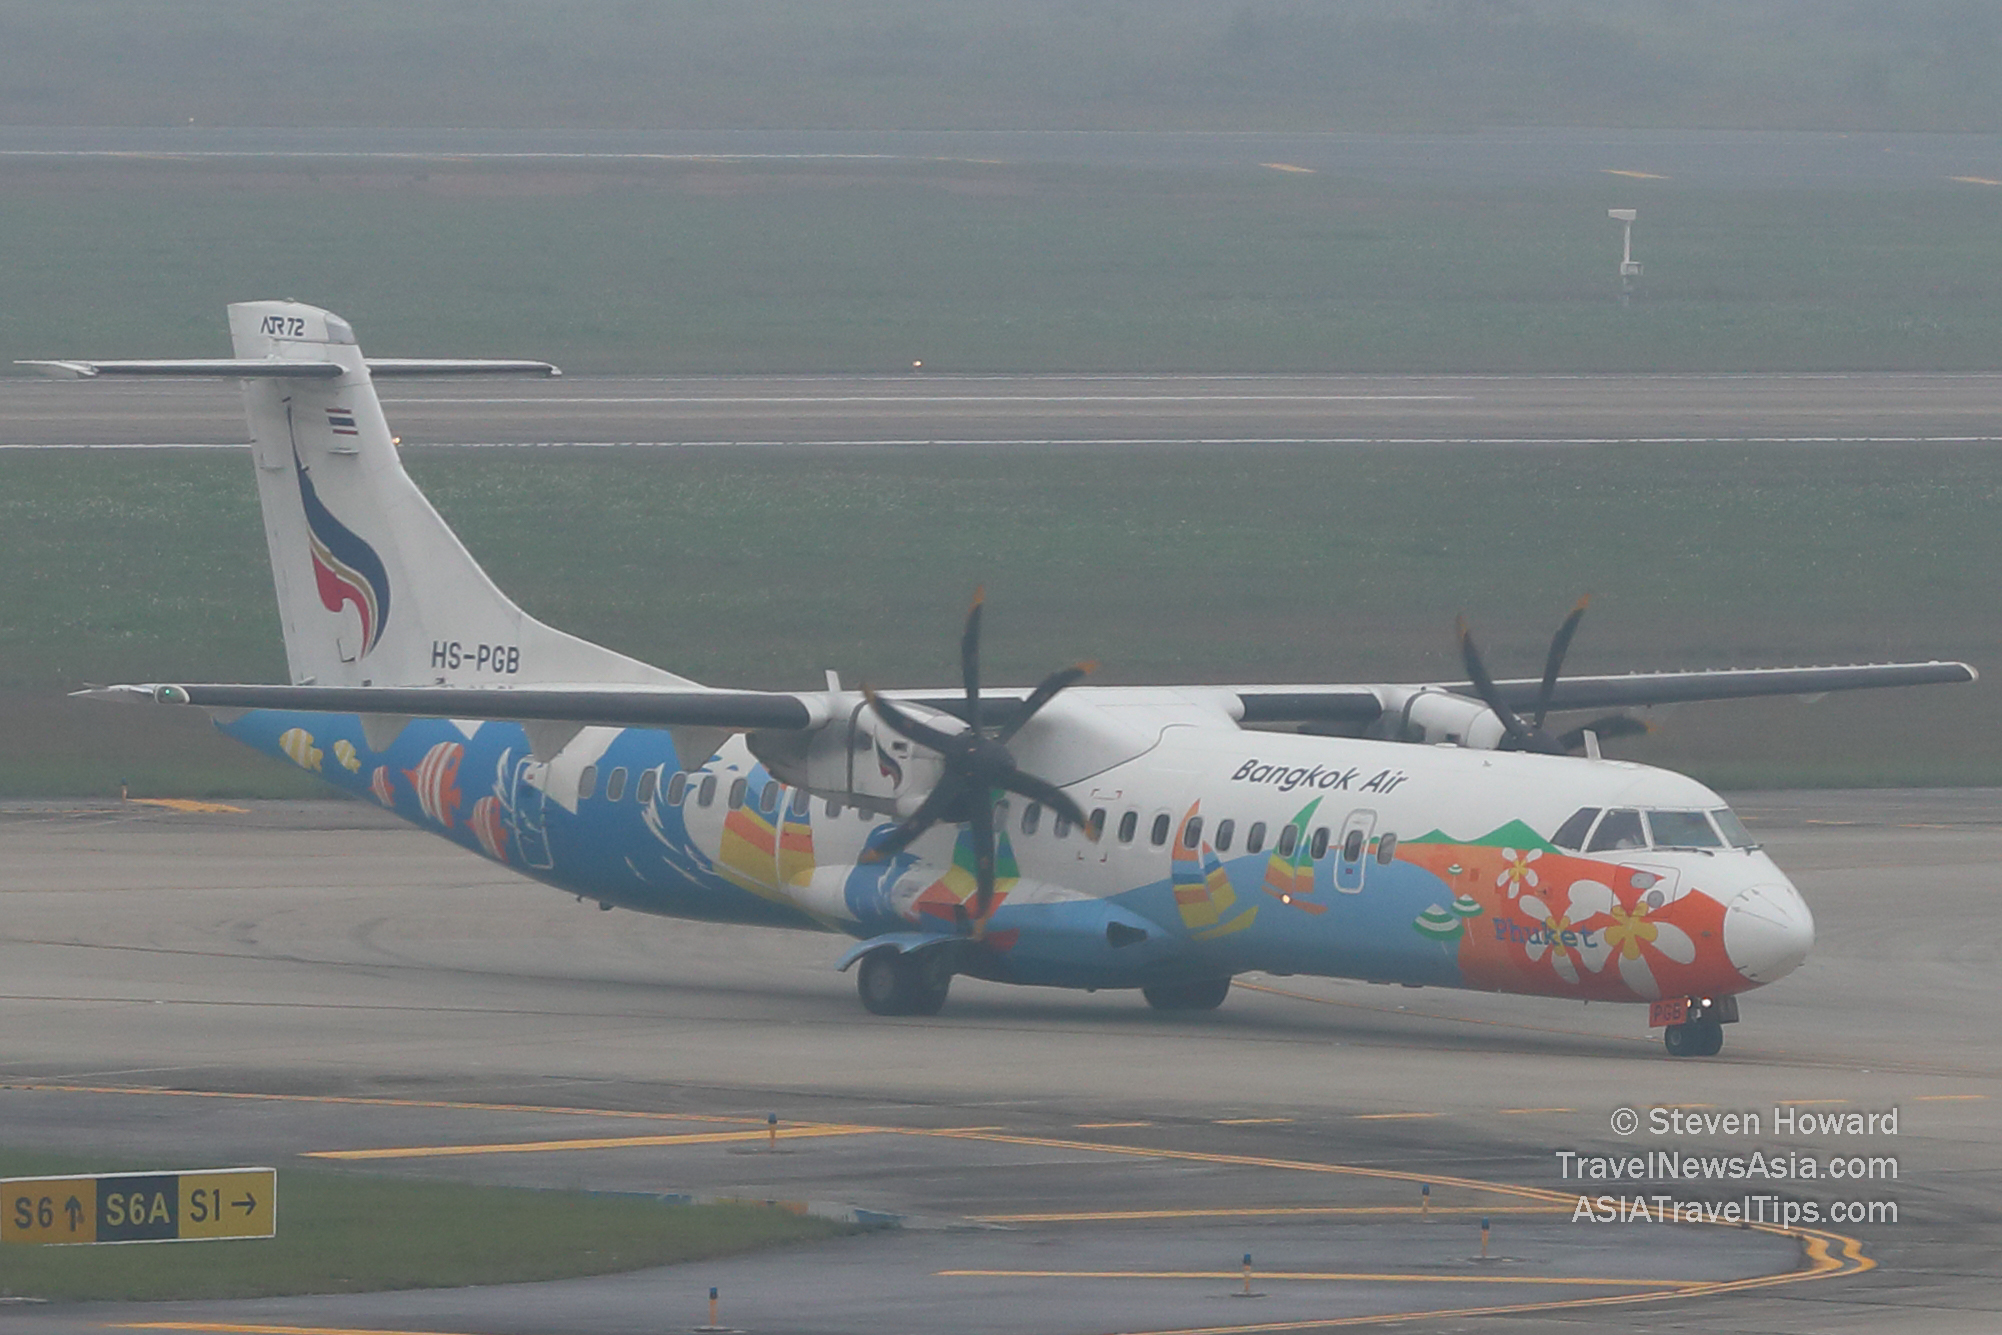 Bangkok Airways ATR 72-500 on a foggy day in Hanoi. Picture by Steven Howard of TravelNewsAsia.com Click to enlarge.